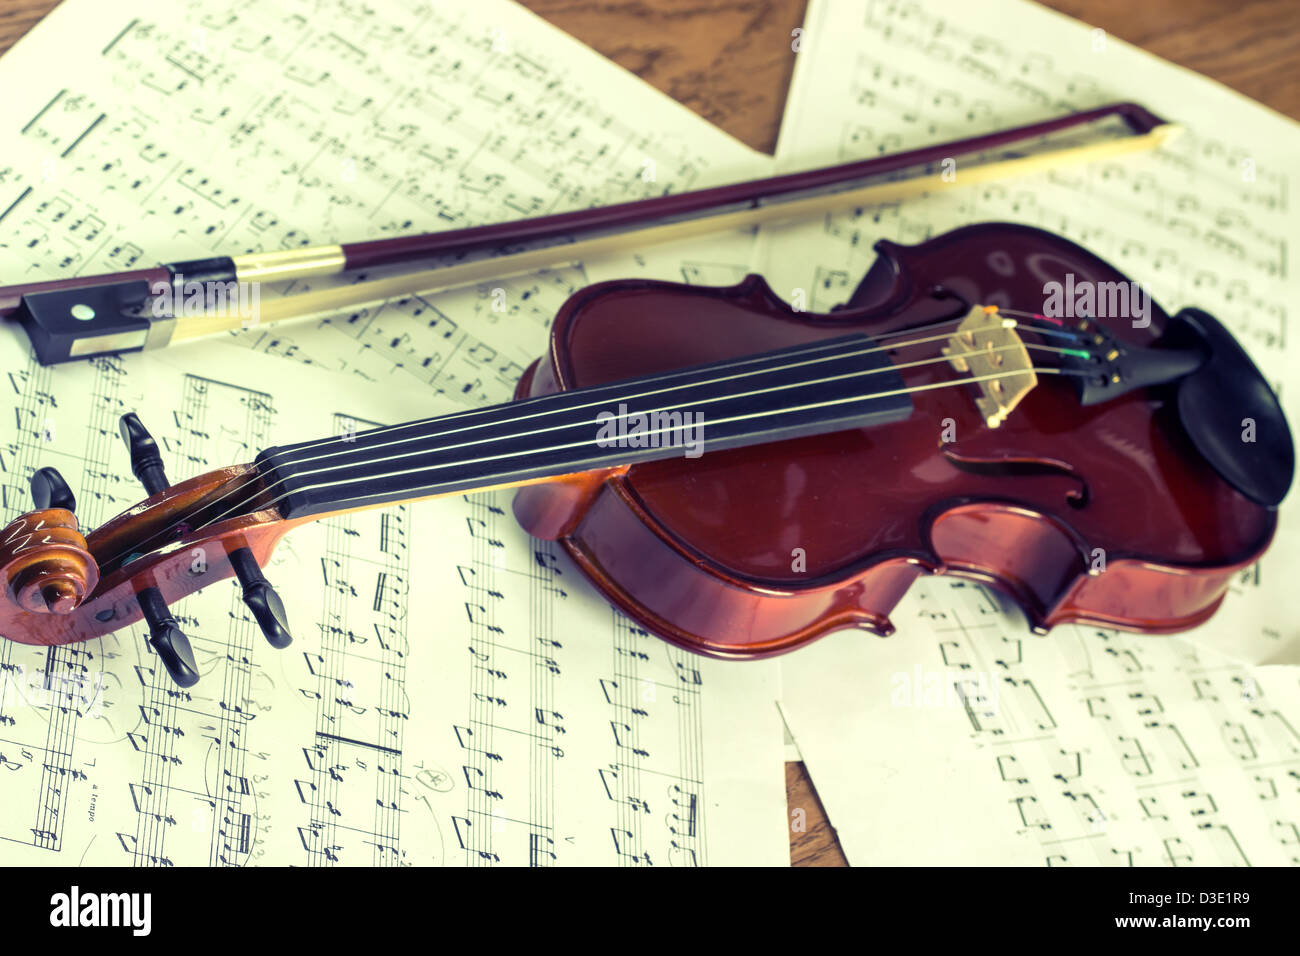 Violin with bow and music sheet Stock Photo